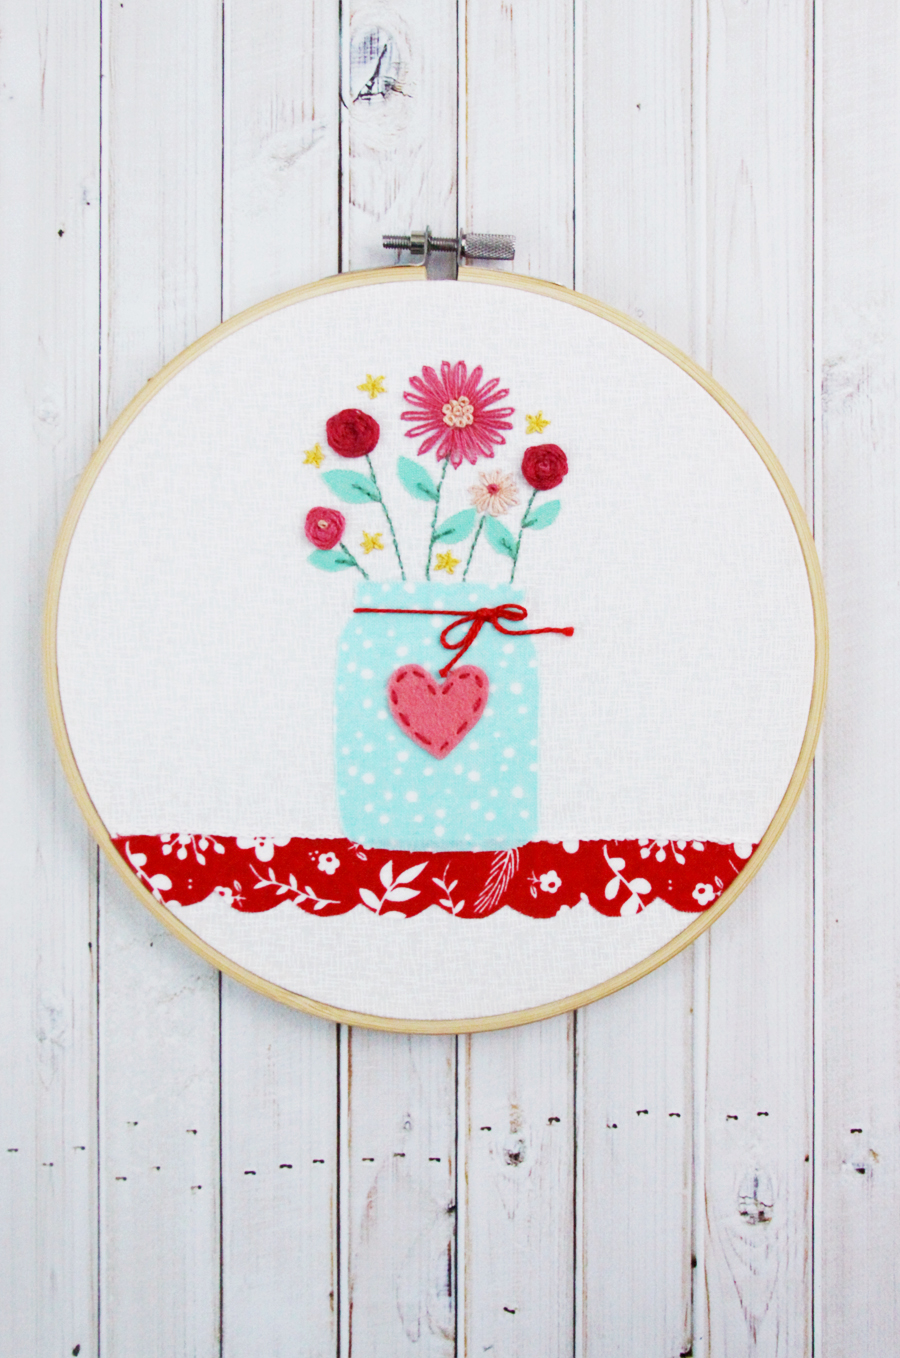 Singing in the Rain Floral Embroidery Pattern – Flamingo Toes